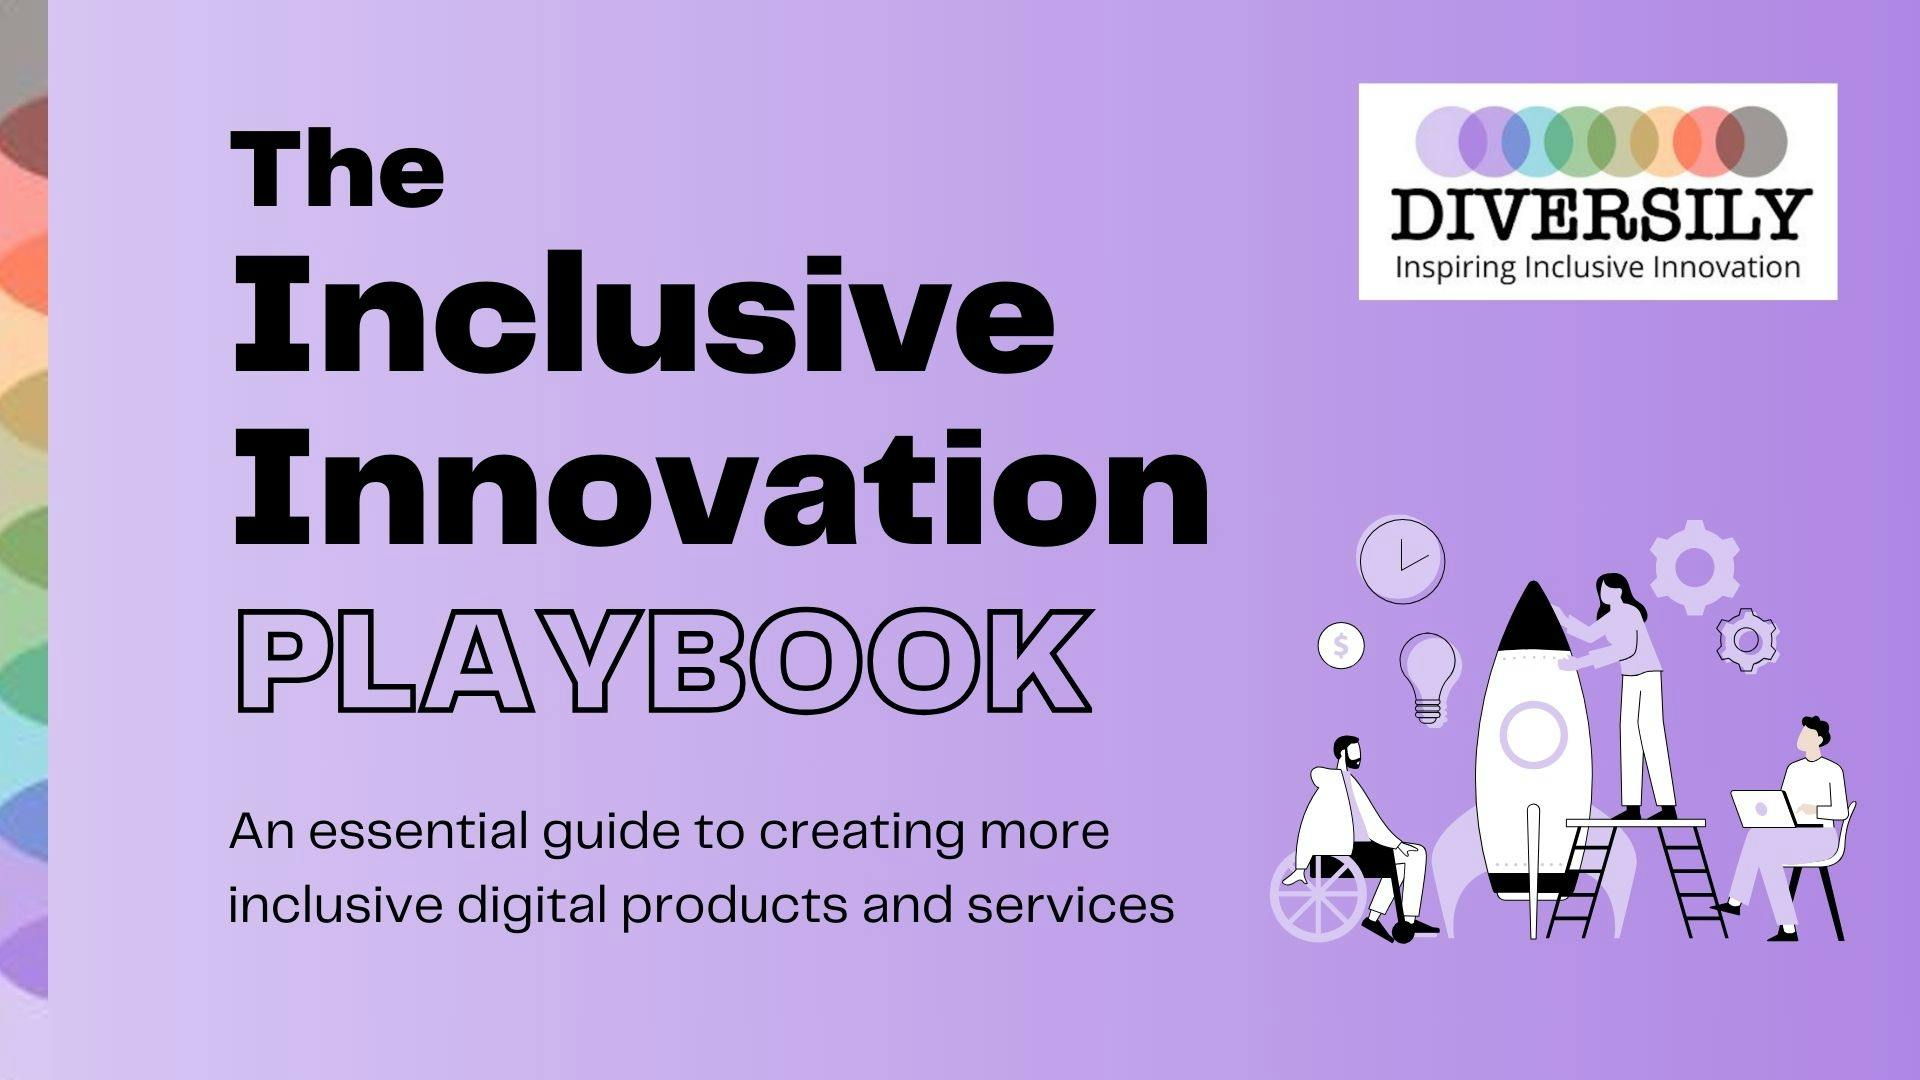 Front cover of The Inclusive Innovation Playbook. An essential guide to creating more inclusive digital products and services by Diversily. Shows sketch of people collaborating to build a rocket. One person is in a wheelchair. 